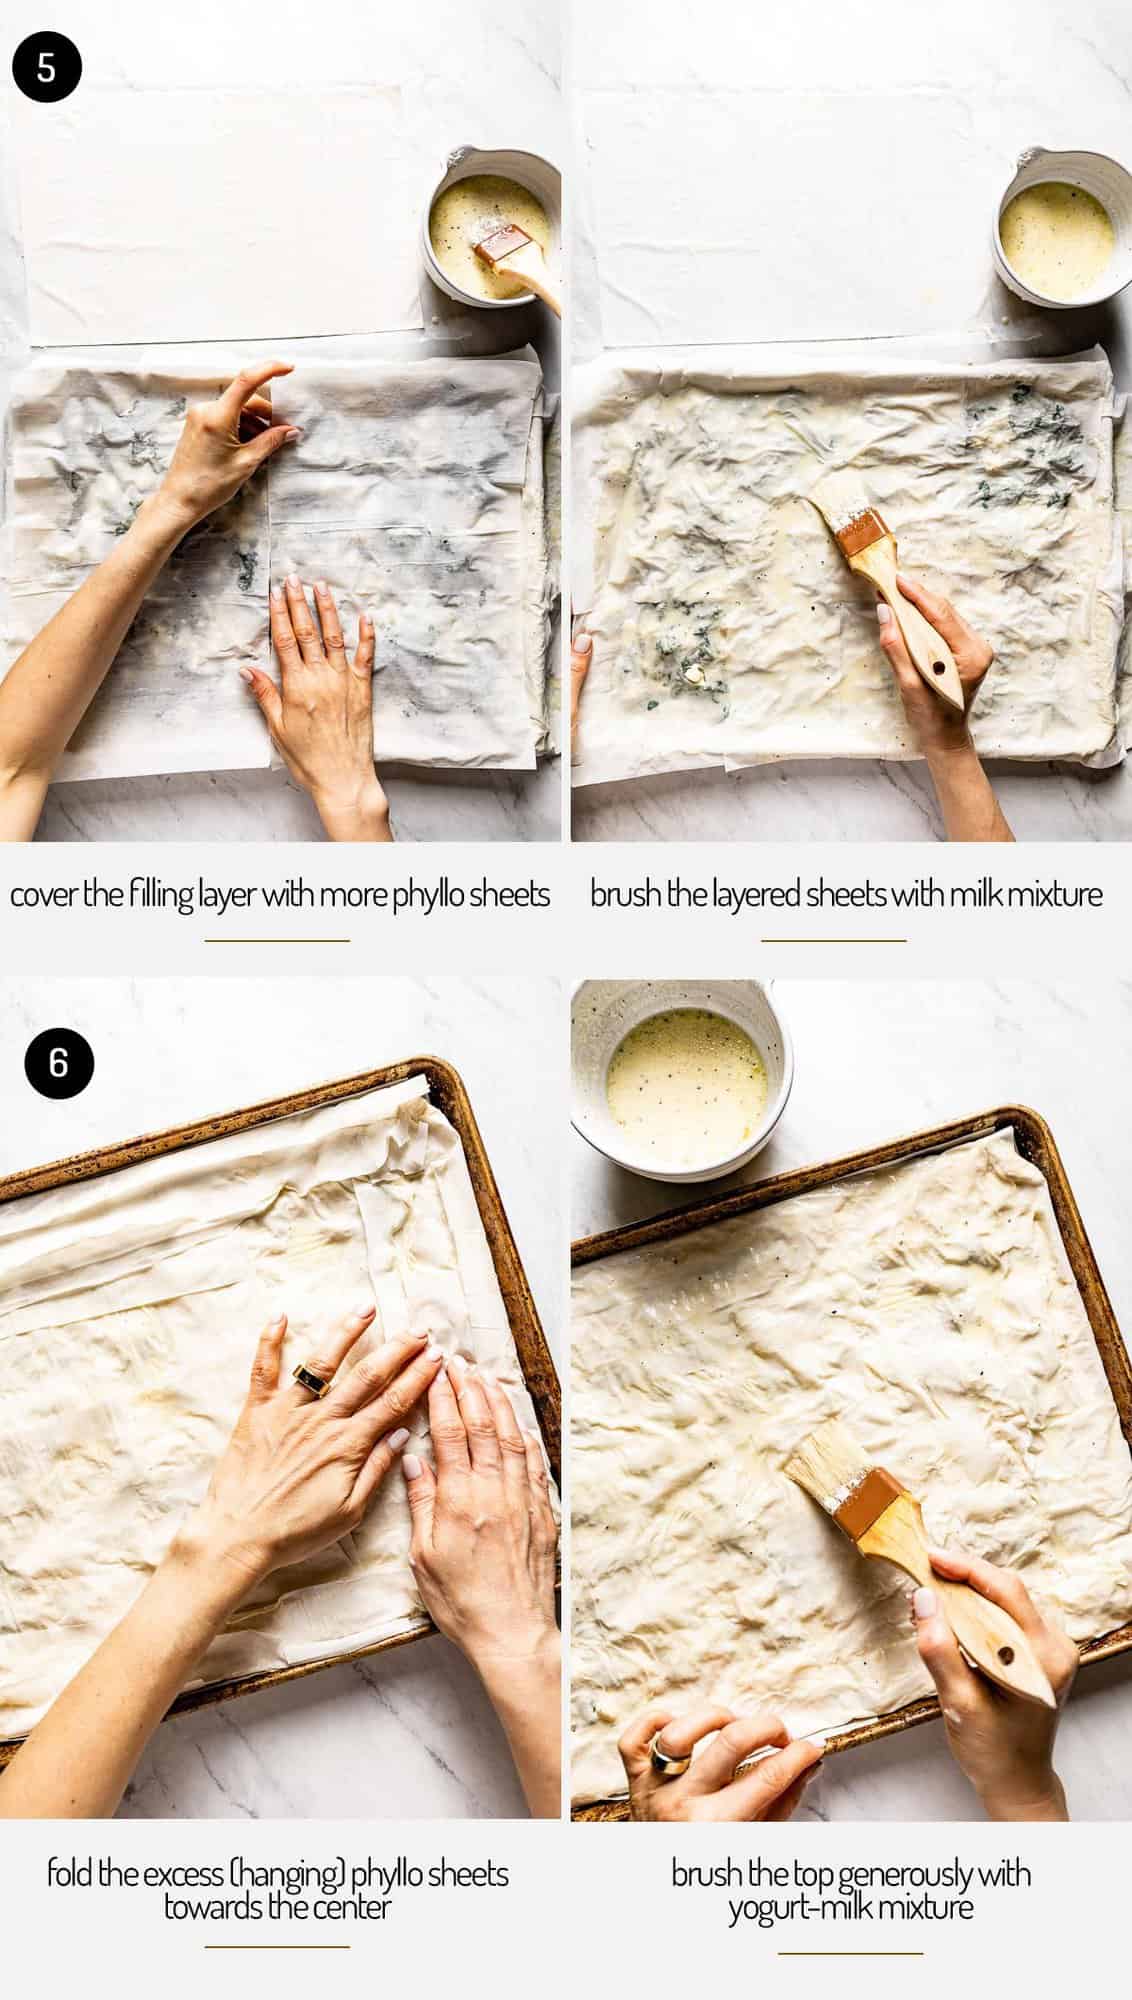 a collage of images showing how to assemble cheese borak food